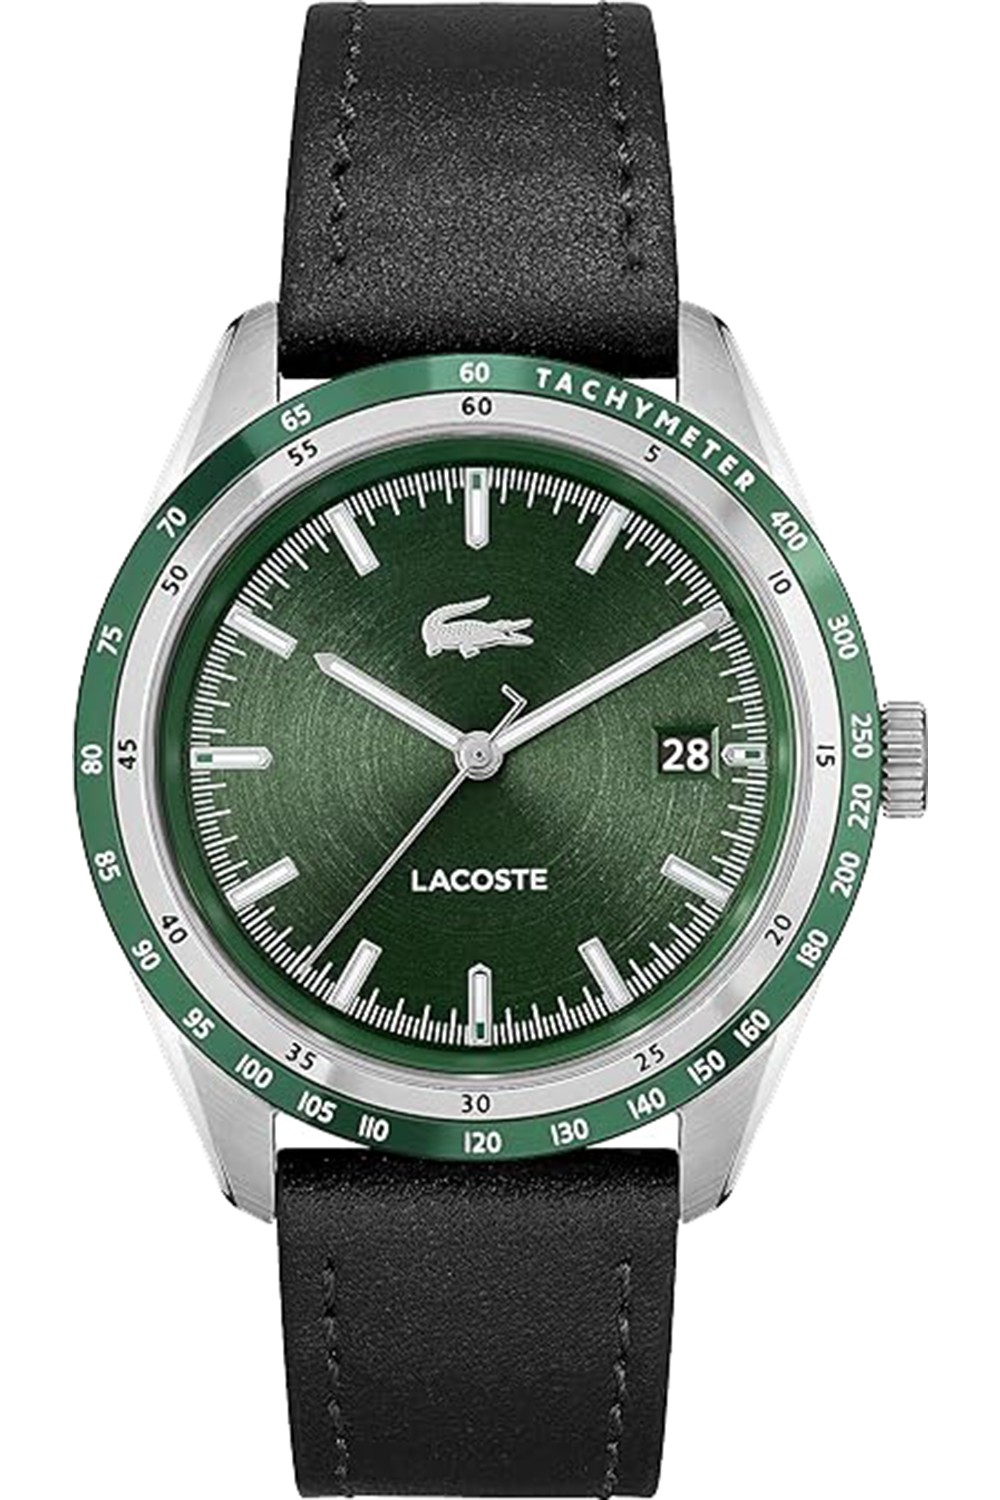 Lacoste Men\'s Watch Lacoste EVERETT Leather Men\'s Watches Comprar online 2011292 EVERETT Men\'s Black Barato 2011292 Clicktime.eu» Leather | | Watch Lacoste Black Comprar Watches 2011292